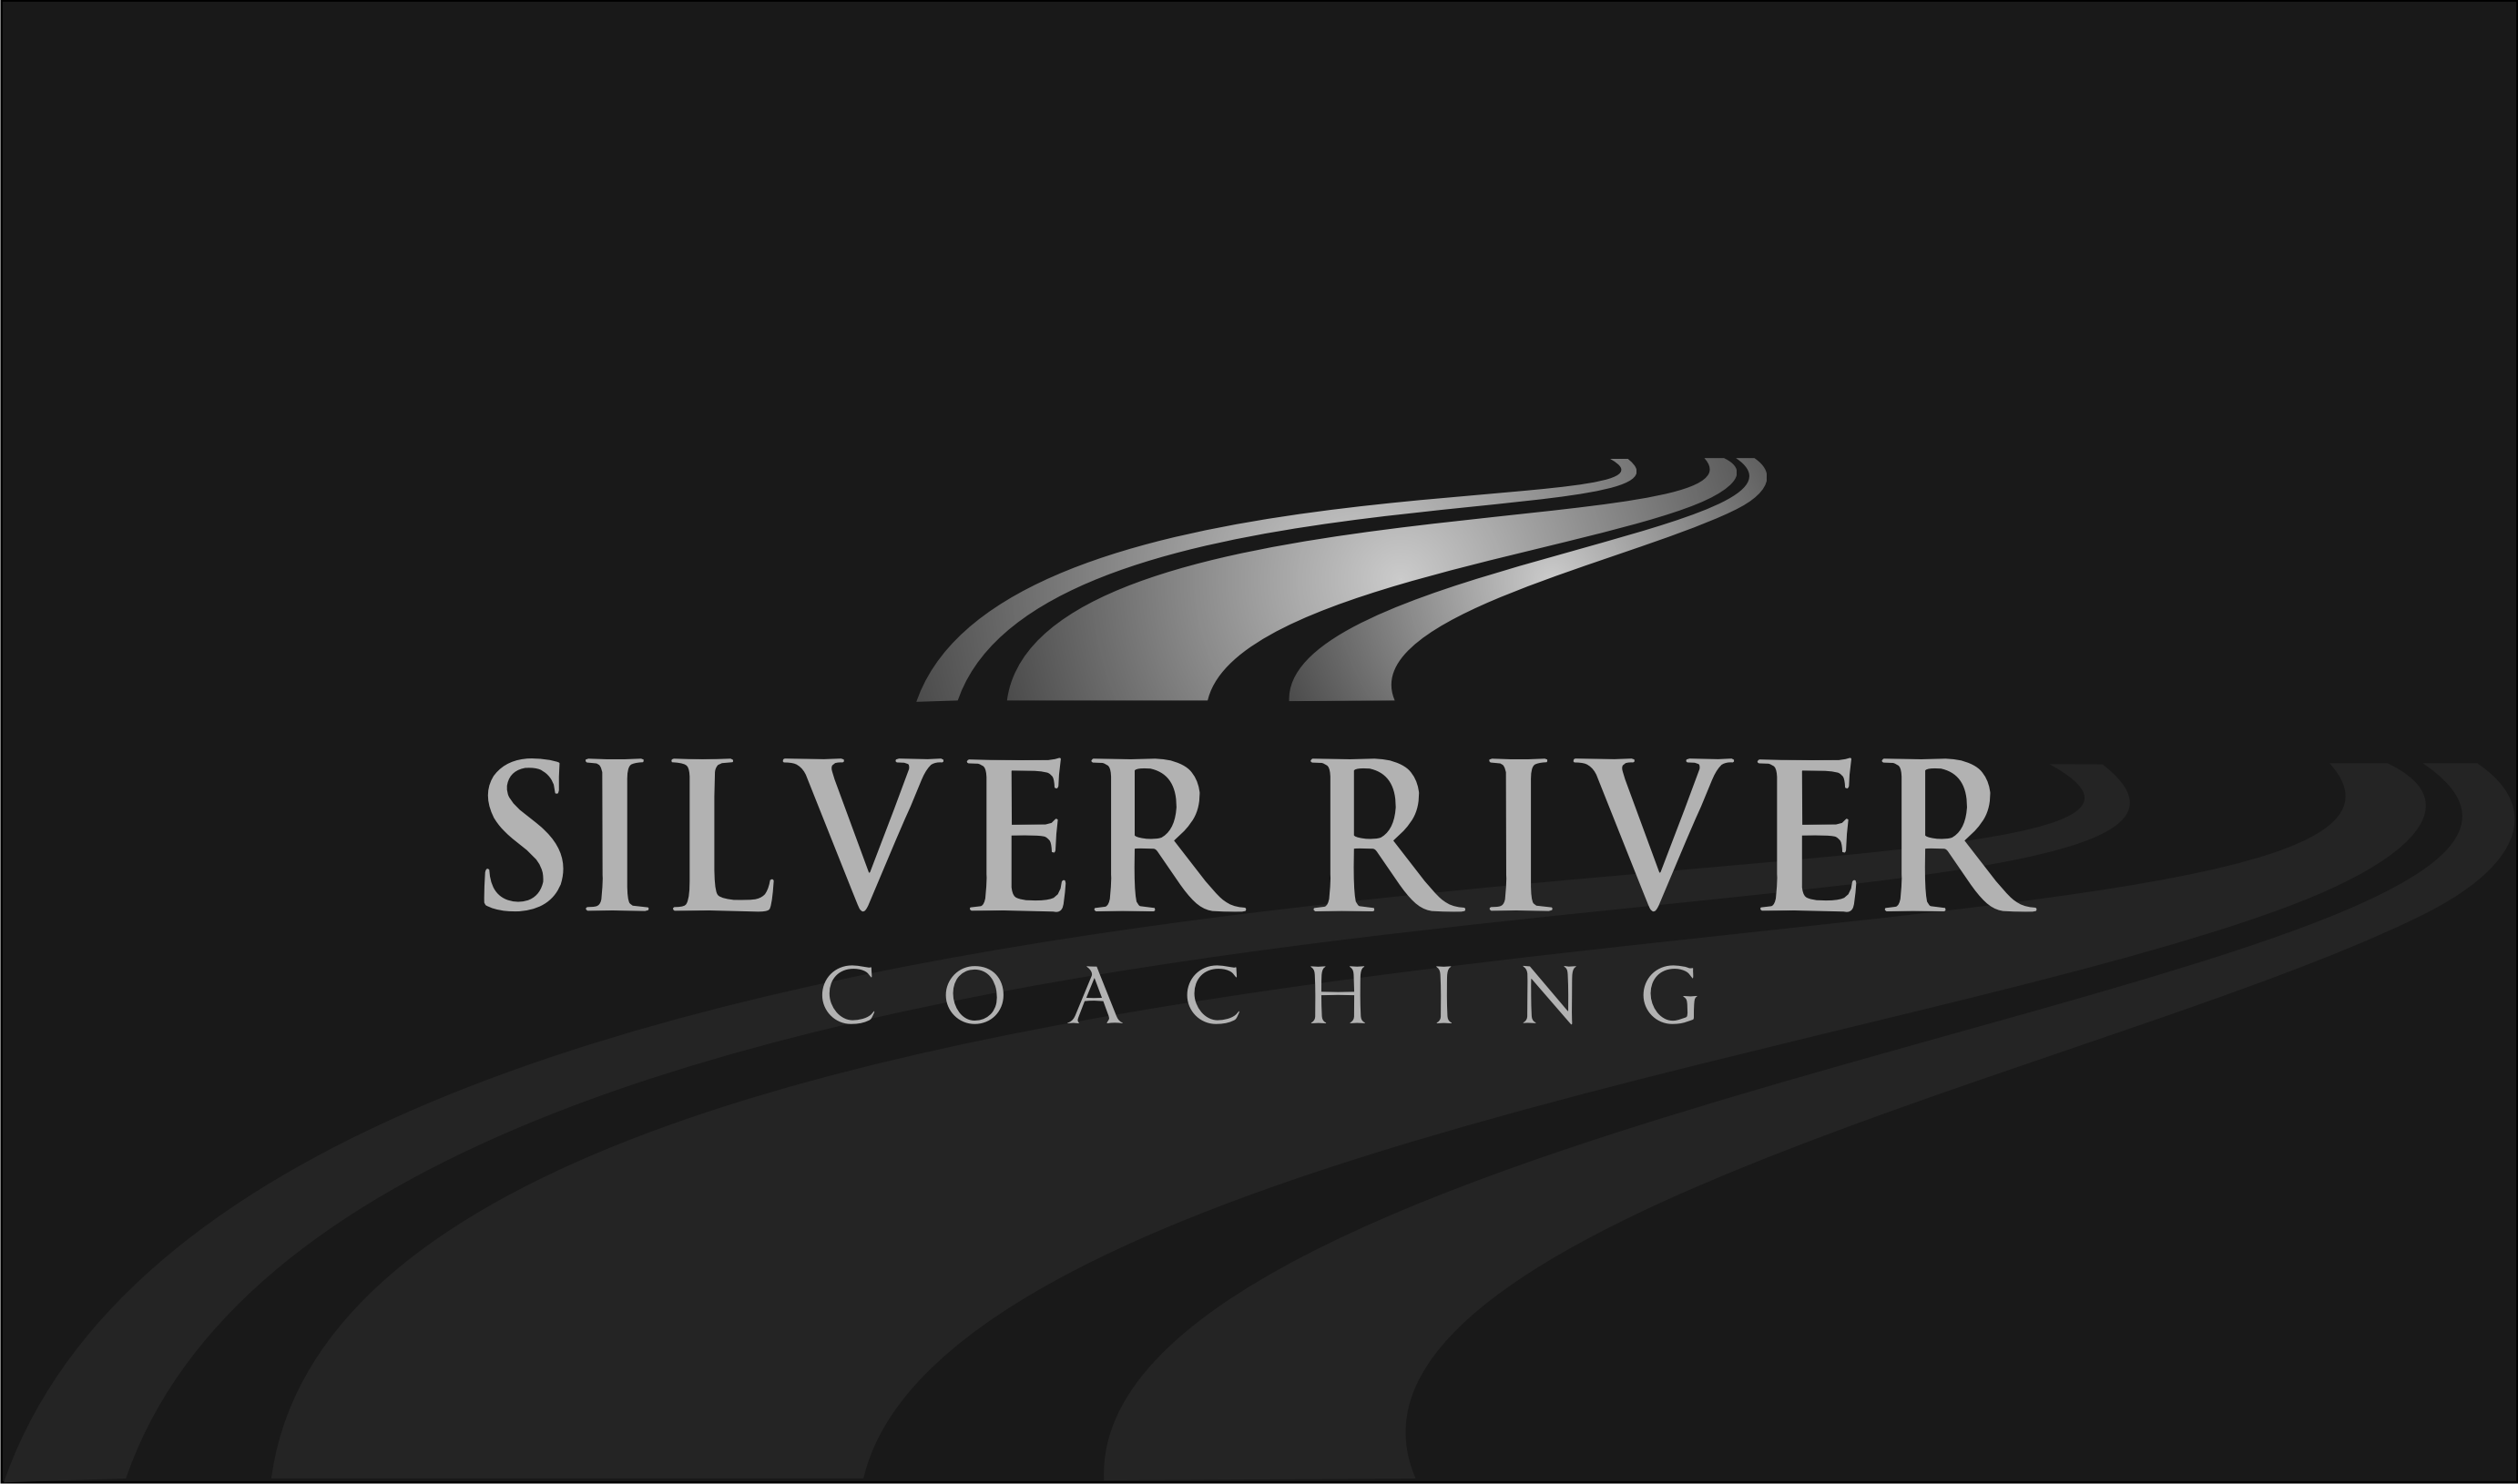 Silver Company Logo - Logo Design Needed for Exciting New Company Silver River Coaching